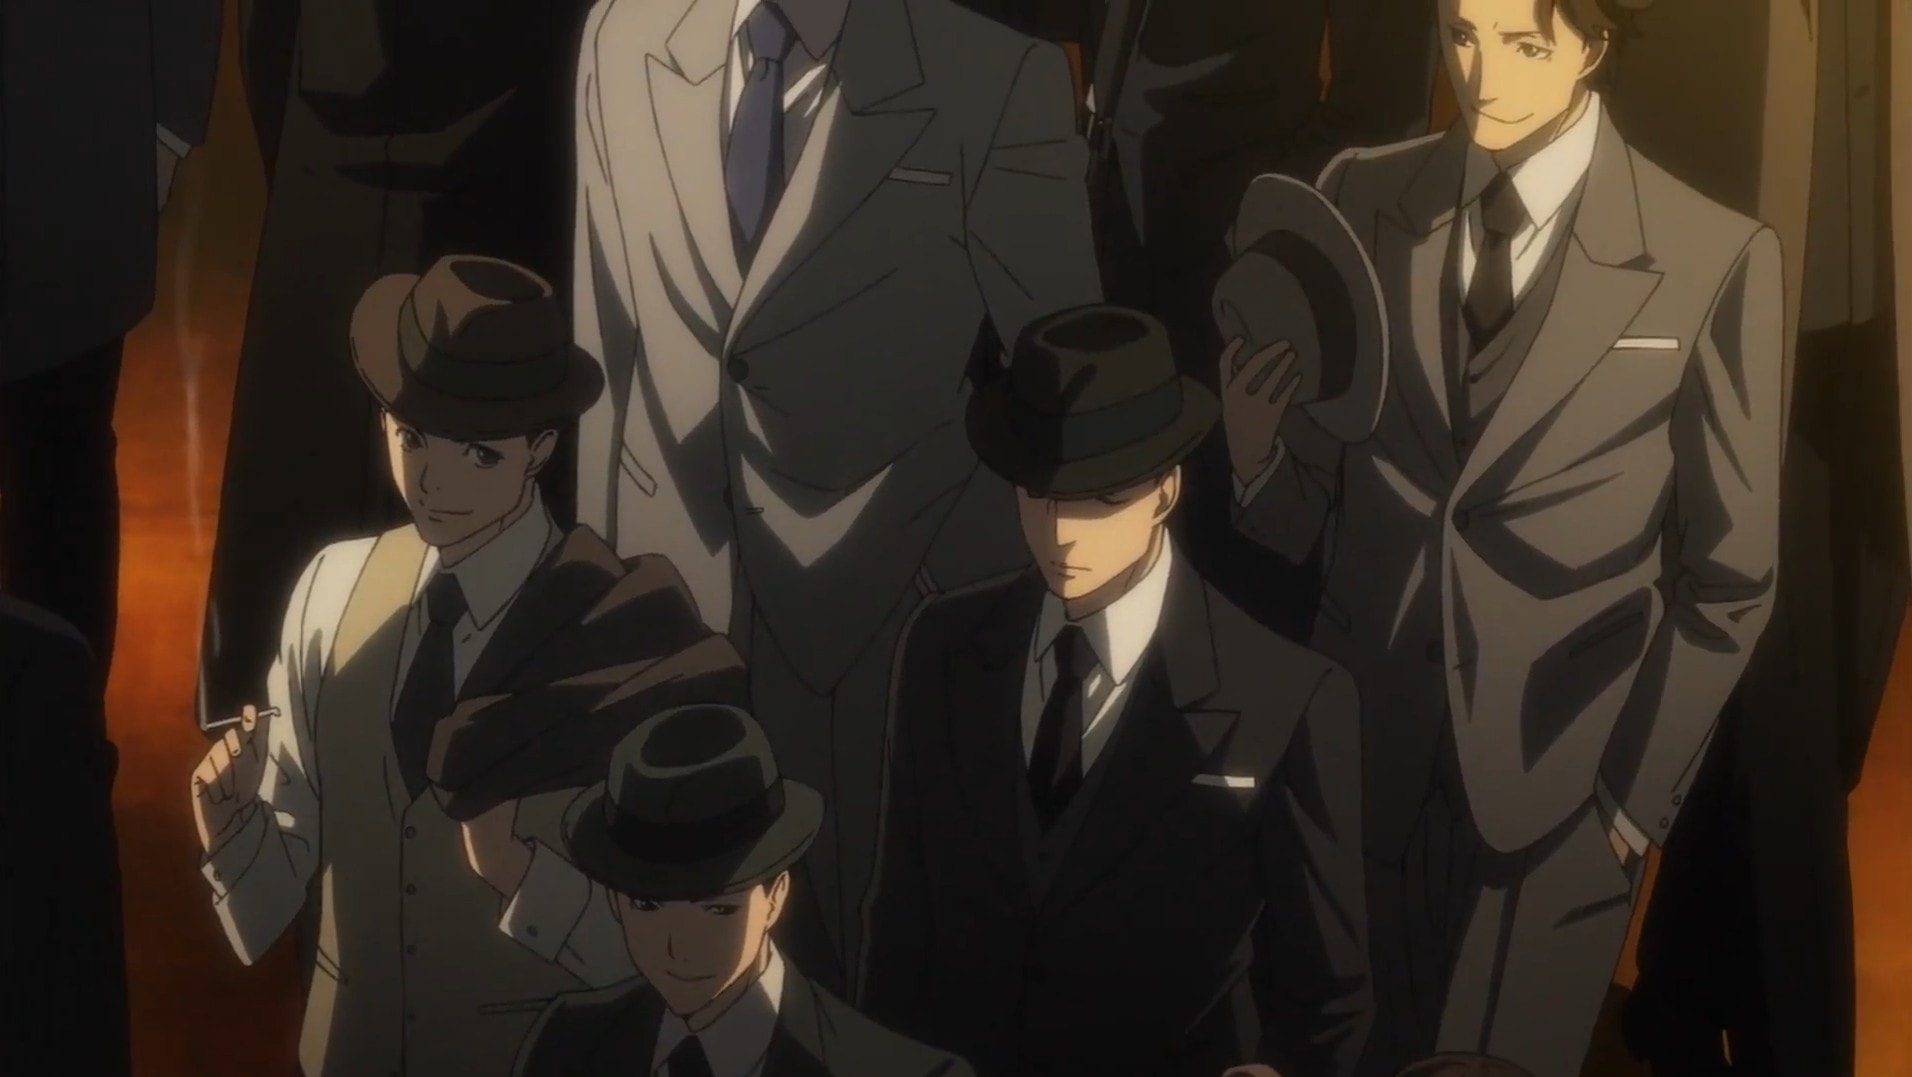 The best spies in all of Japan have gathered together in formal wear - fedoras and suits. 